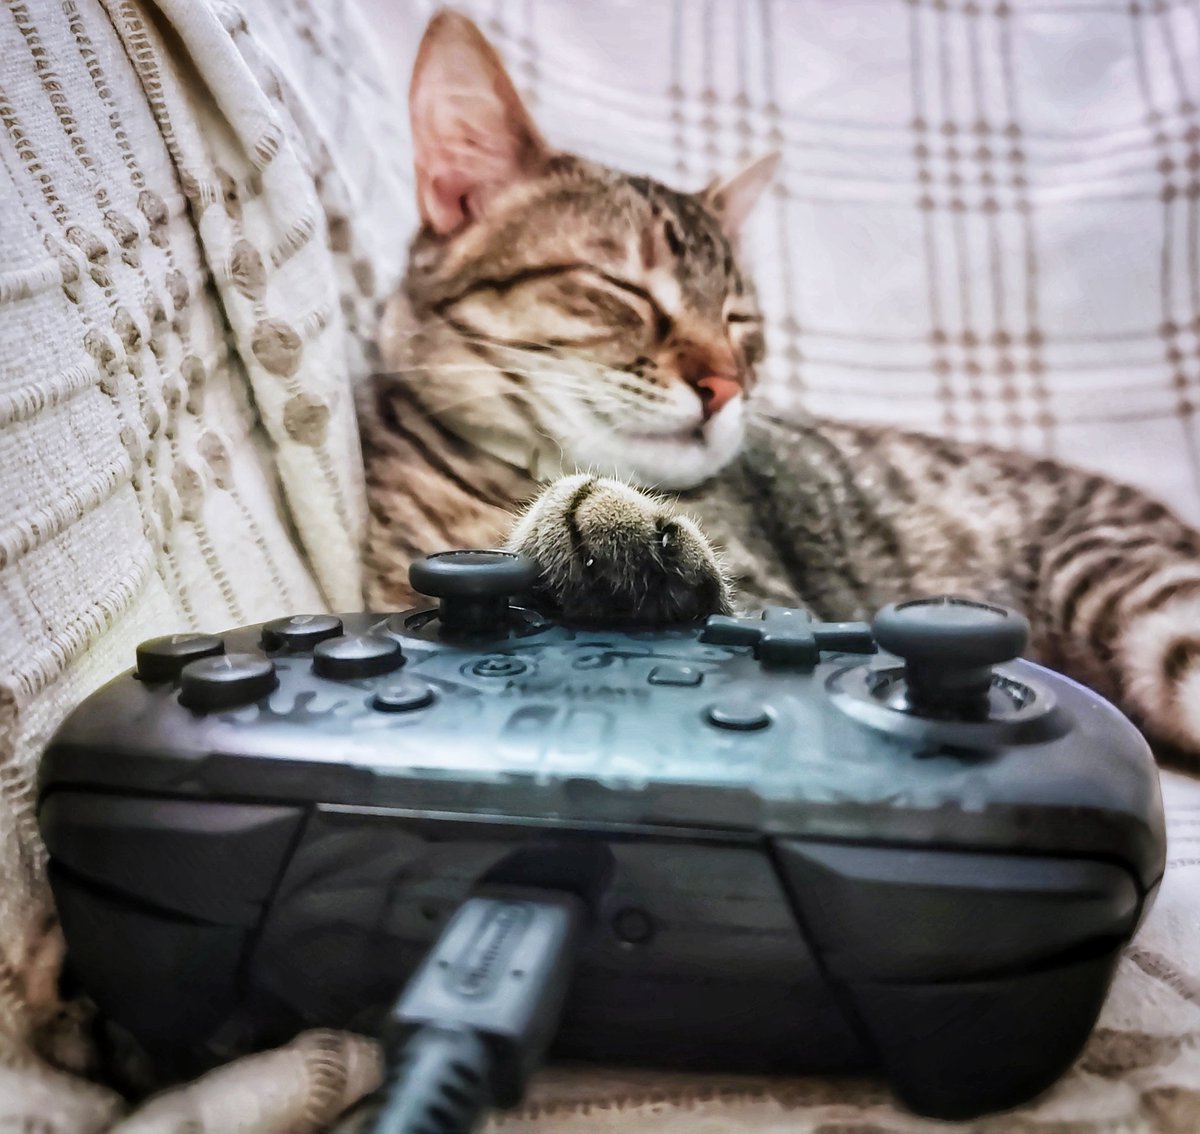 #pippin fell asleep playing with the controller 😂😍😘 #cats #catsofinstagram  #CatsOnTwitter  #CatsofTwittter  #CatsOfX #CatsAreFamily  #CatsLover